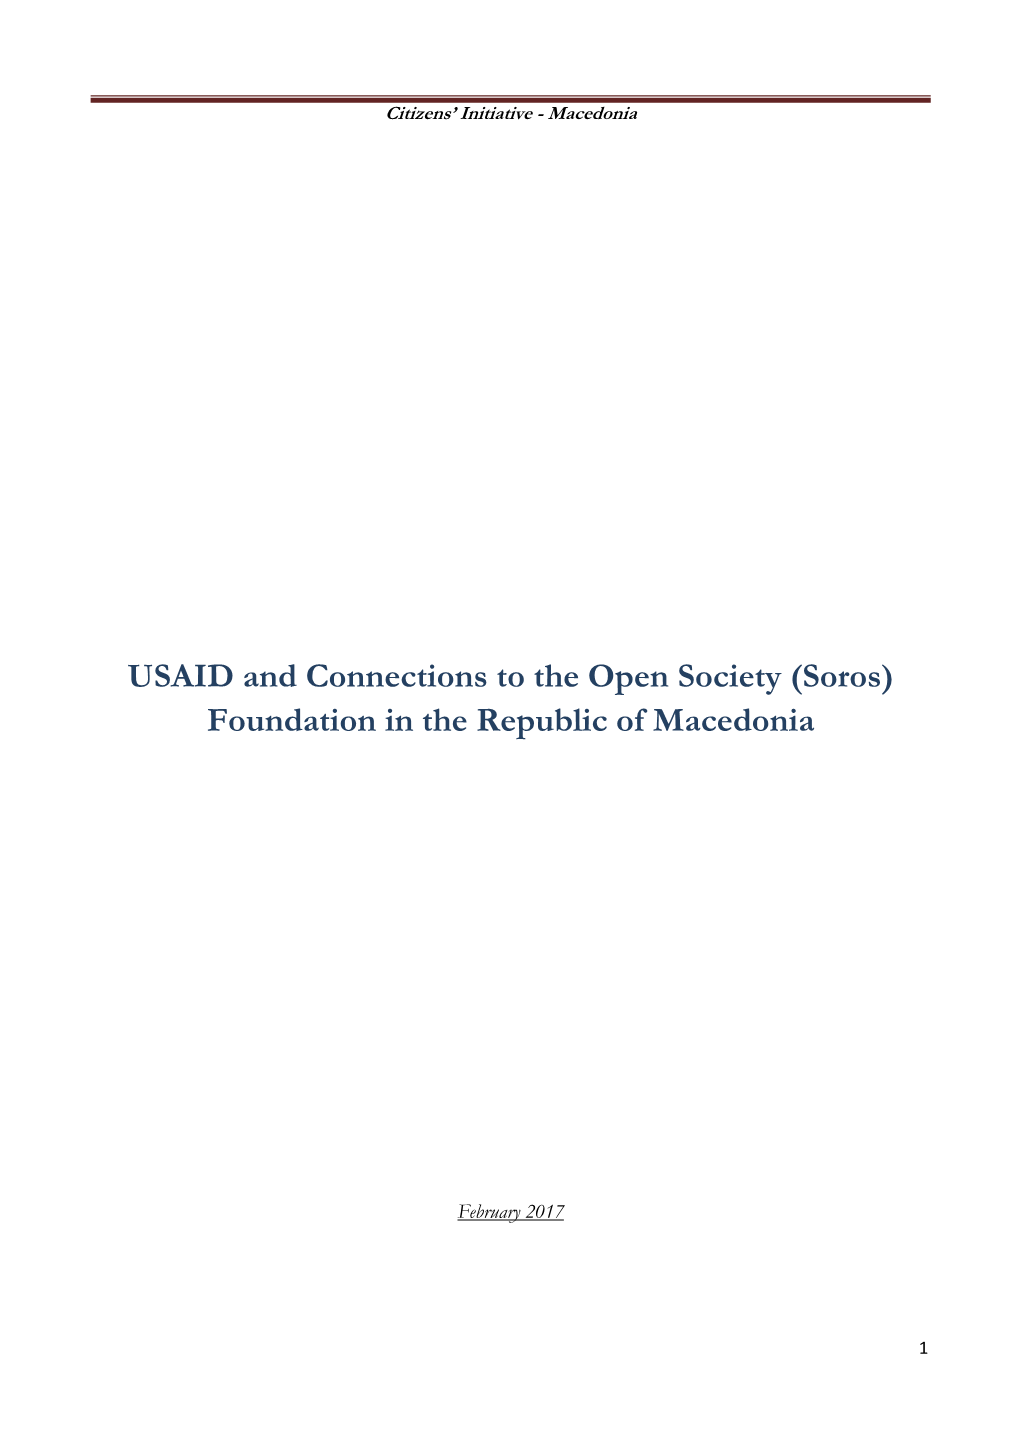 USAID and Connections to the Open Society (Soros) Foundation in the Republic of Macedonia